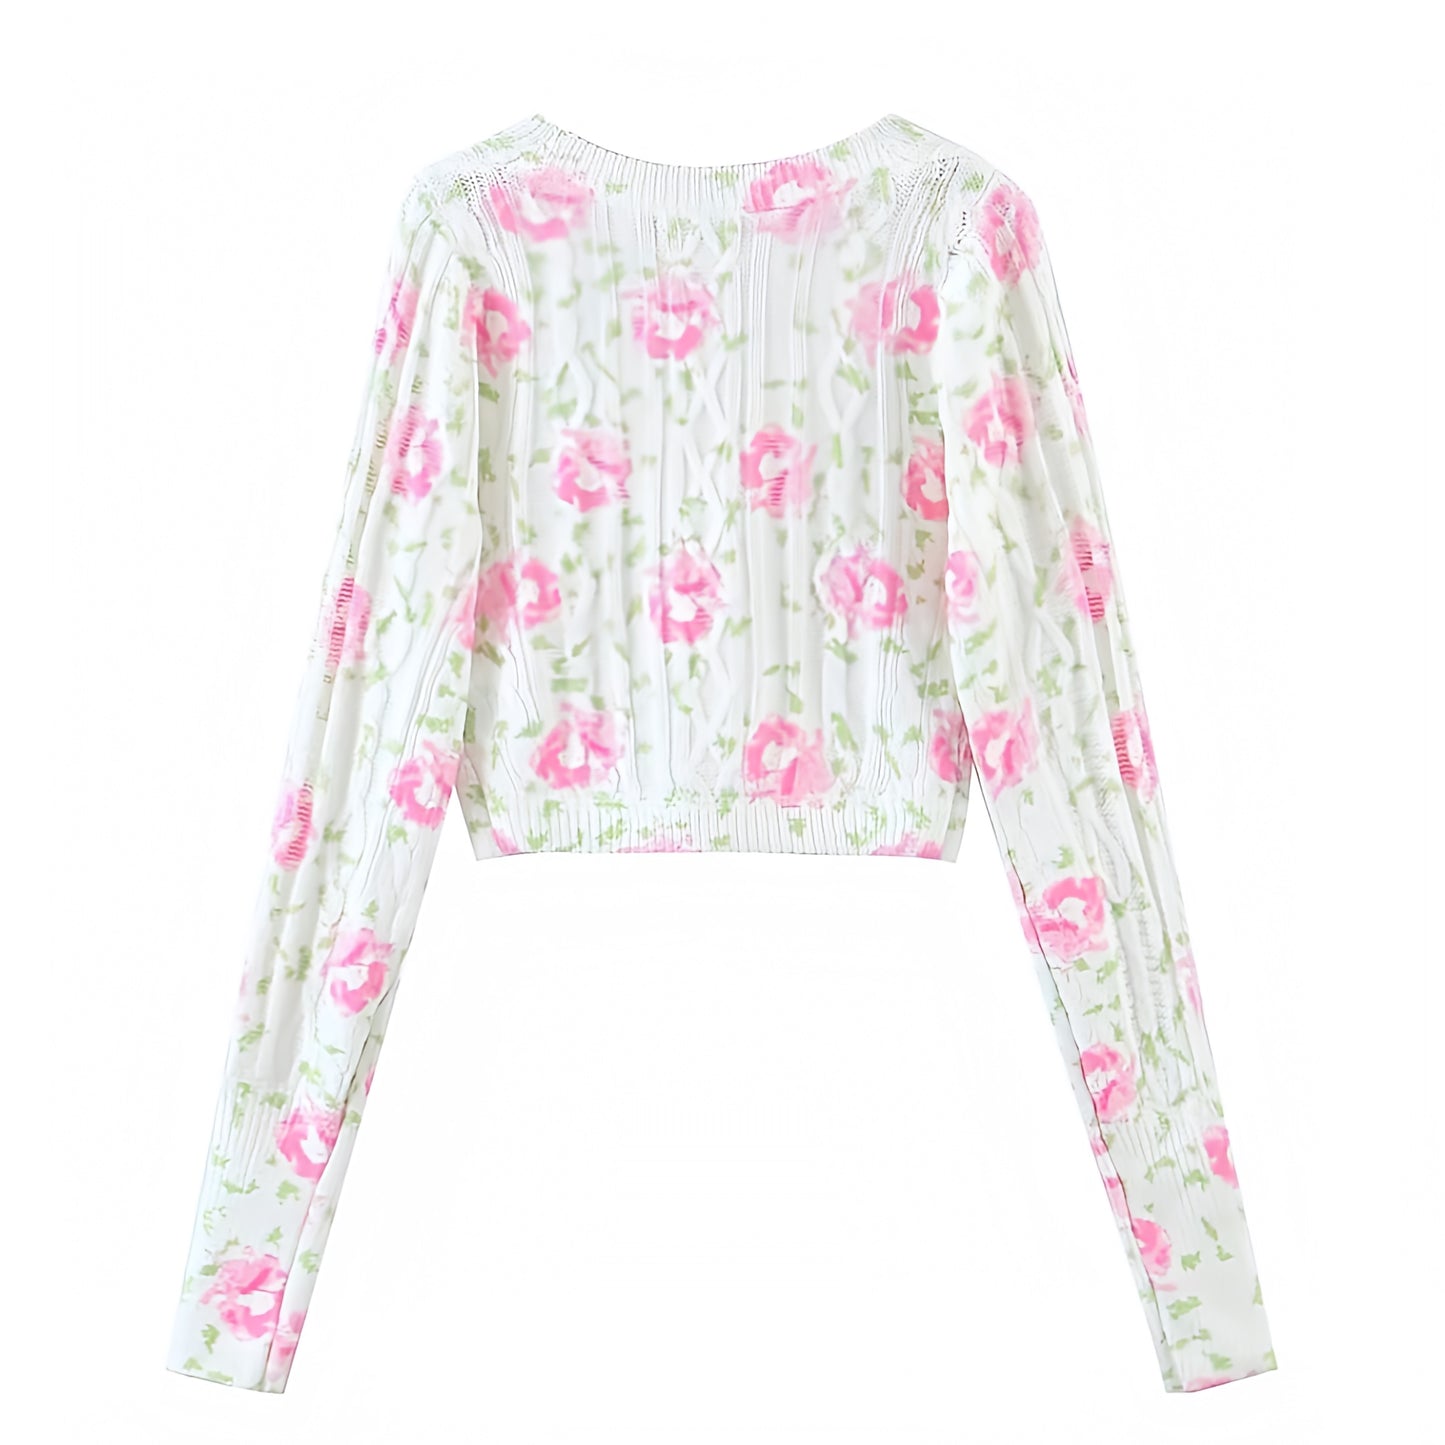 floral-print-pink-and-white-multi-color-flower-patterned-v-neck-cable-knit-crochet-long-sleeve-button-down-crop-cardigan-sweater-sweatshirt-coat-cotton-pastel-spring-2024-summer-chic-trendy-women-ladies-elegant-semi-formal-classy-preppy-style-feminine-zara-revolve-loveshackfancy-urban-outfitters-brandy-melville